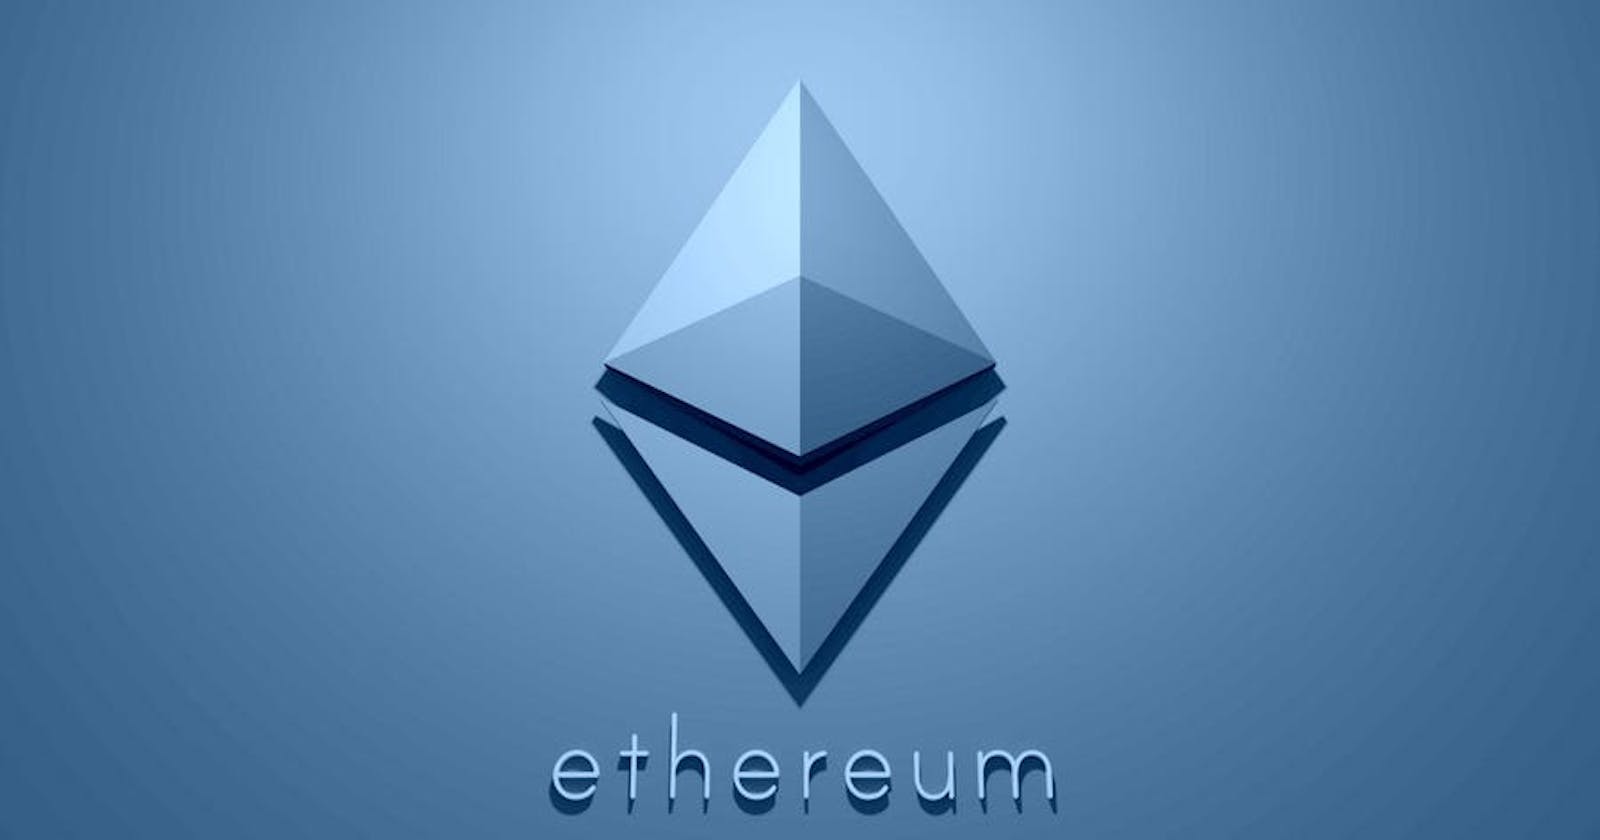 Understand the distribution of fees in the Ethereum